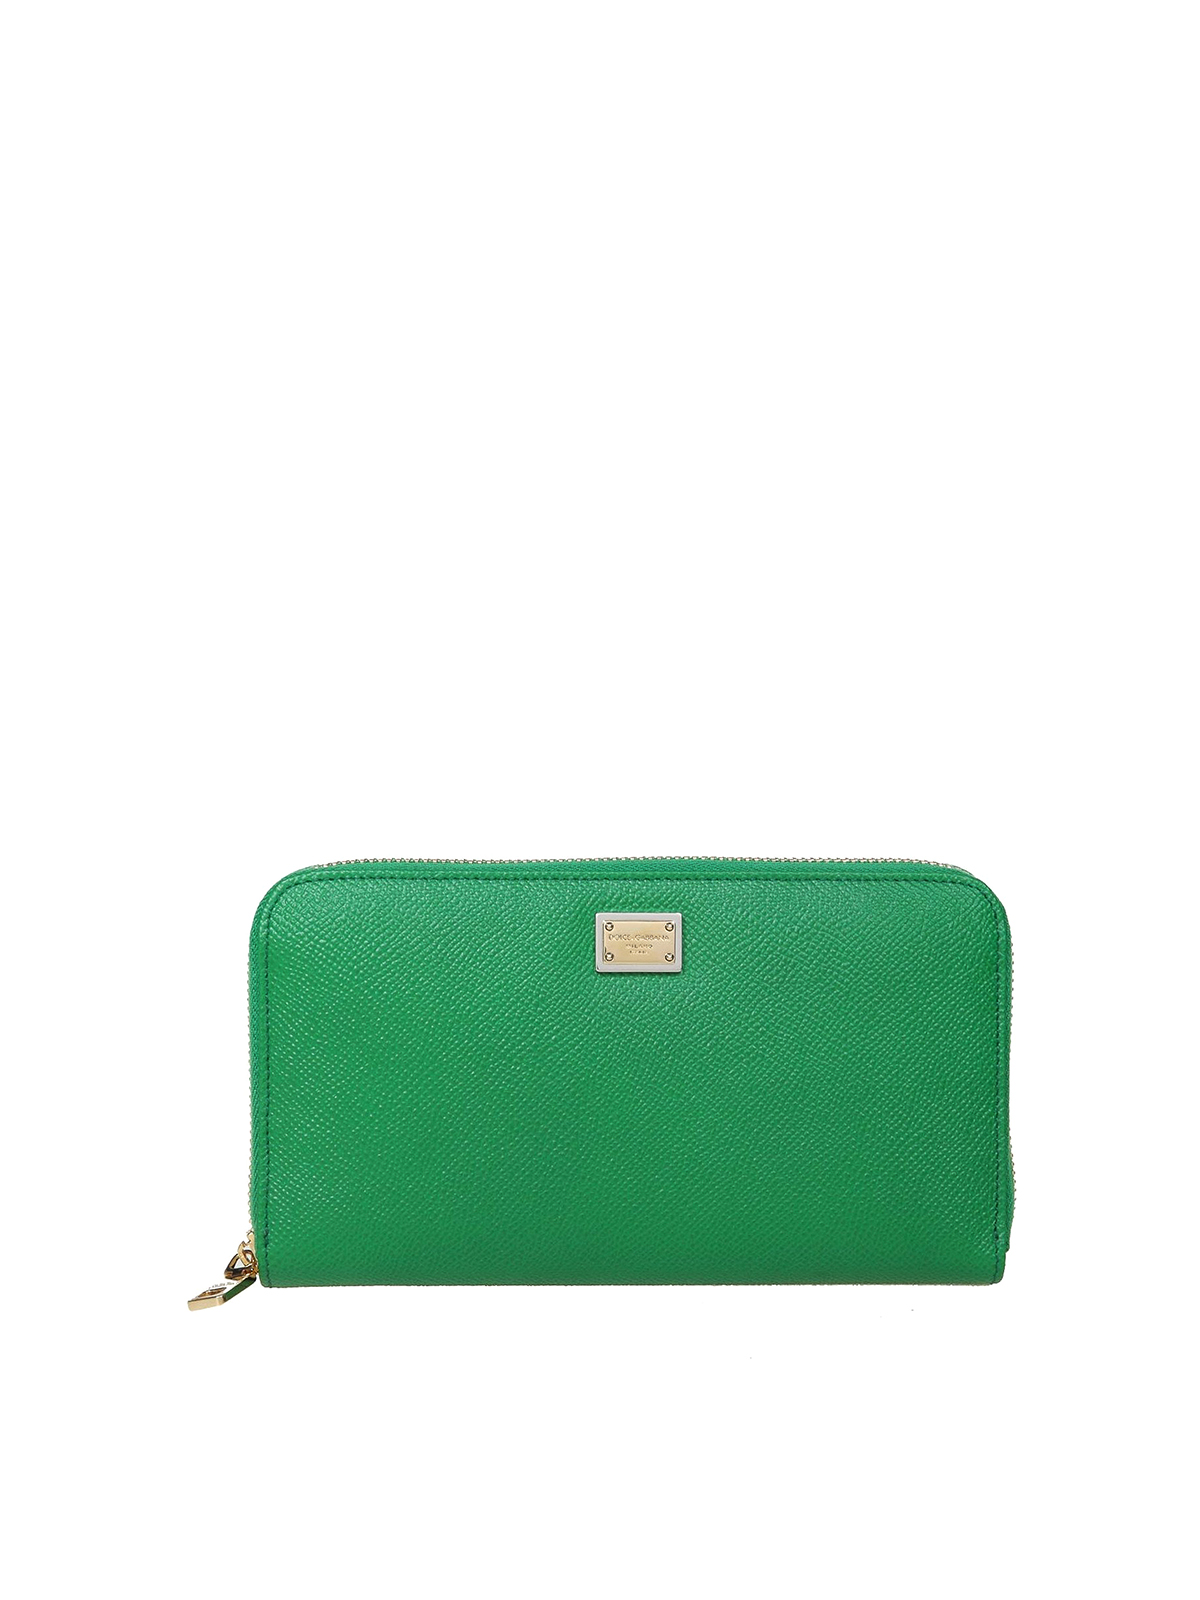 Dolce & Gabbana Leather Wallet With Zip Closure In Green